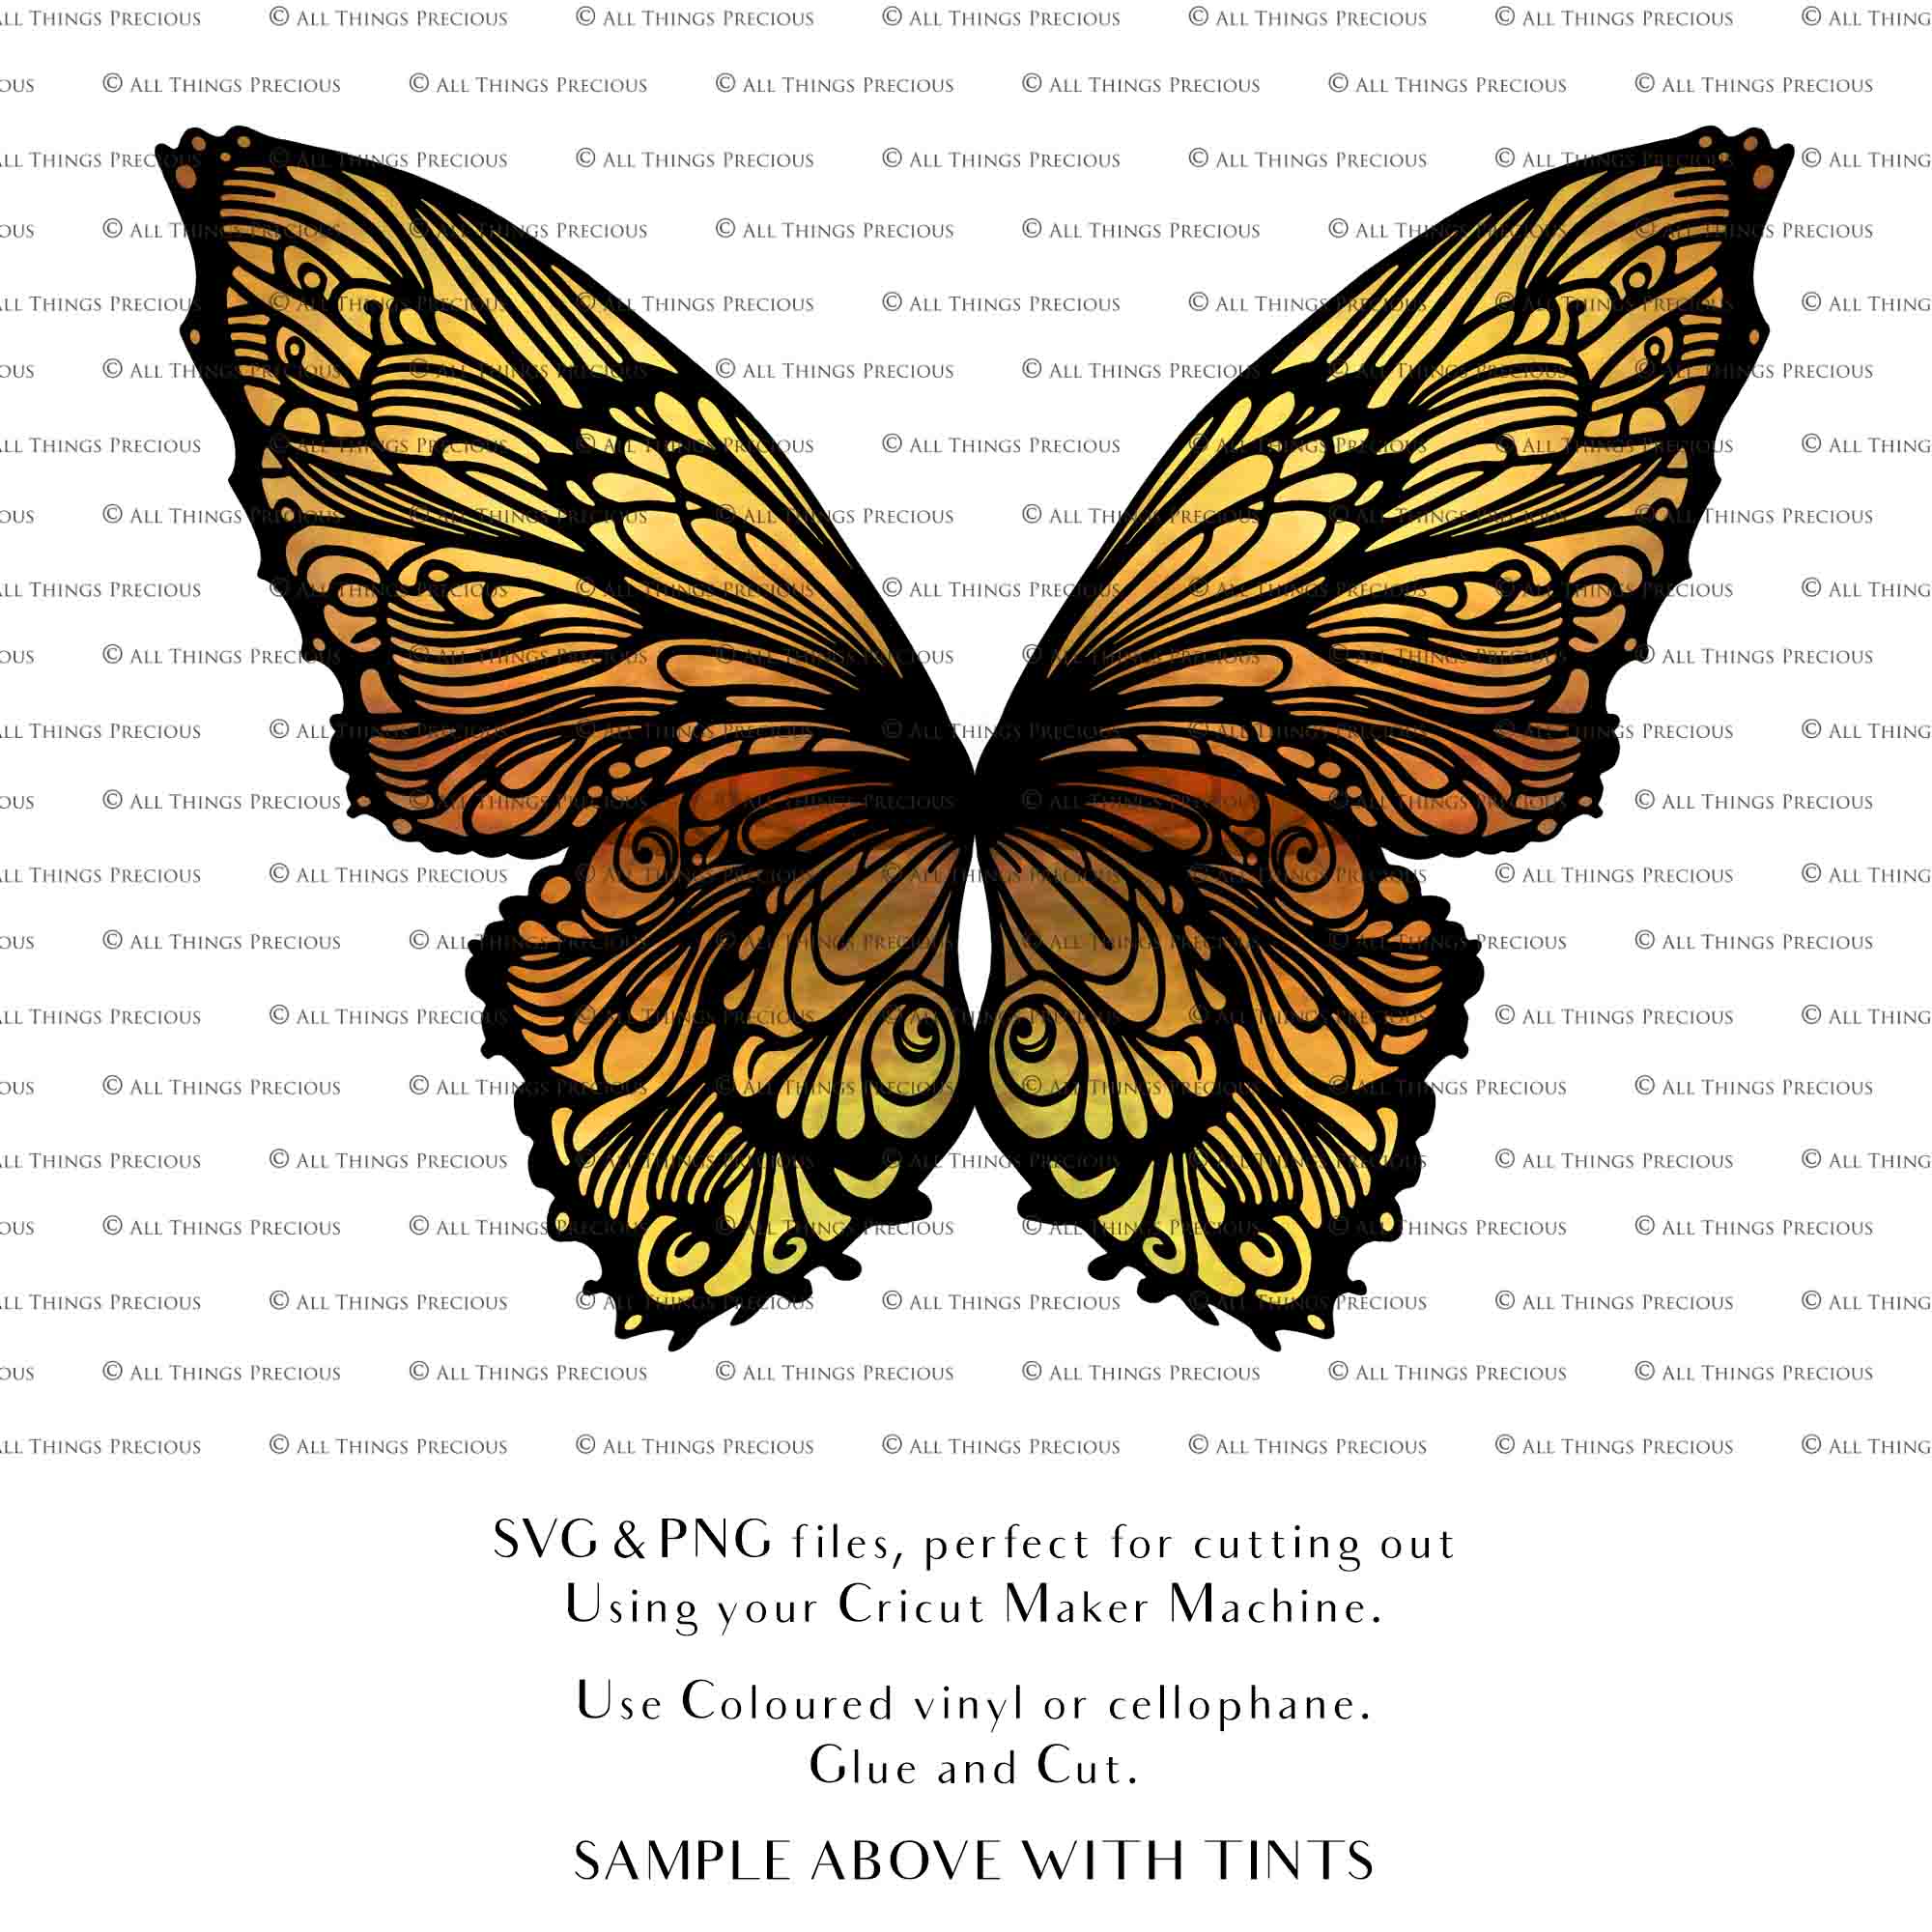 SVG & PNG Fairy Wing files for Cricut or Silhouette Cameo Cutting Machine. To create wearable fairy wings, in adult or children sizes.  Use this graphic design for Halloween Costumes, Fantasy or Cosplay or photography. Use as prints in weddings, engagements or baby shower invitations. for you to cut and assemble. 